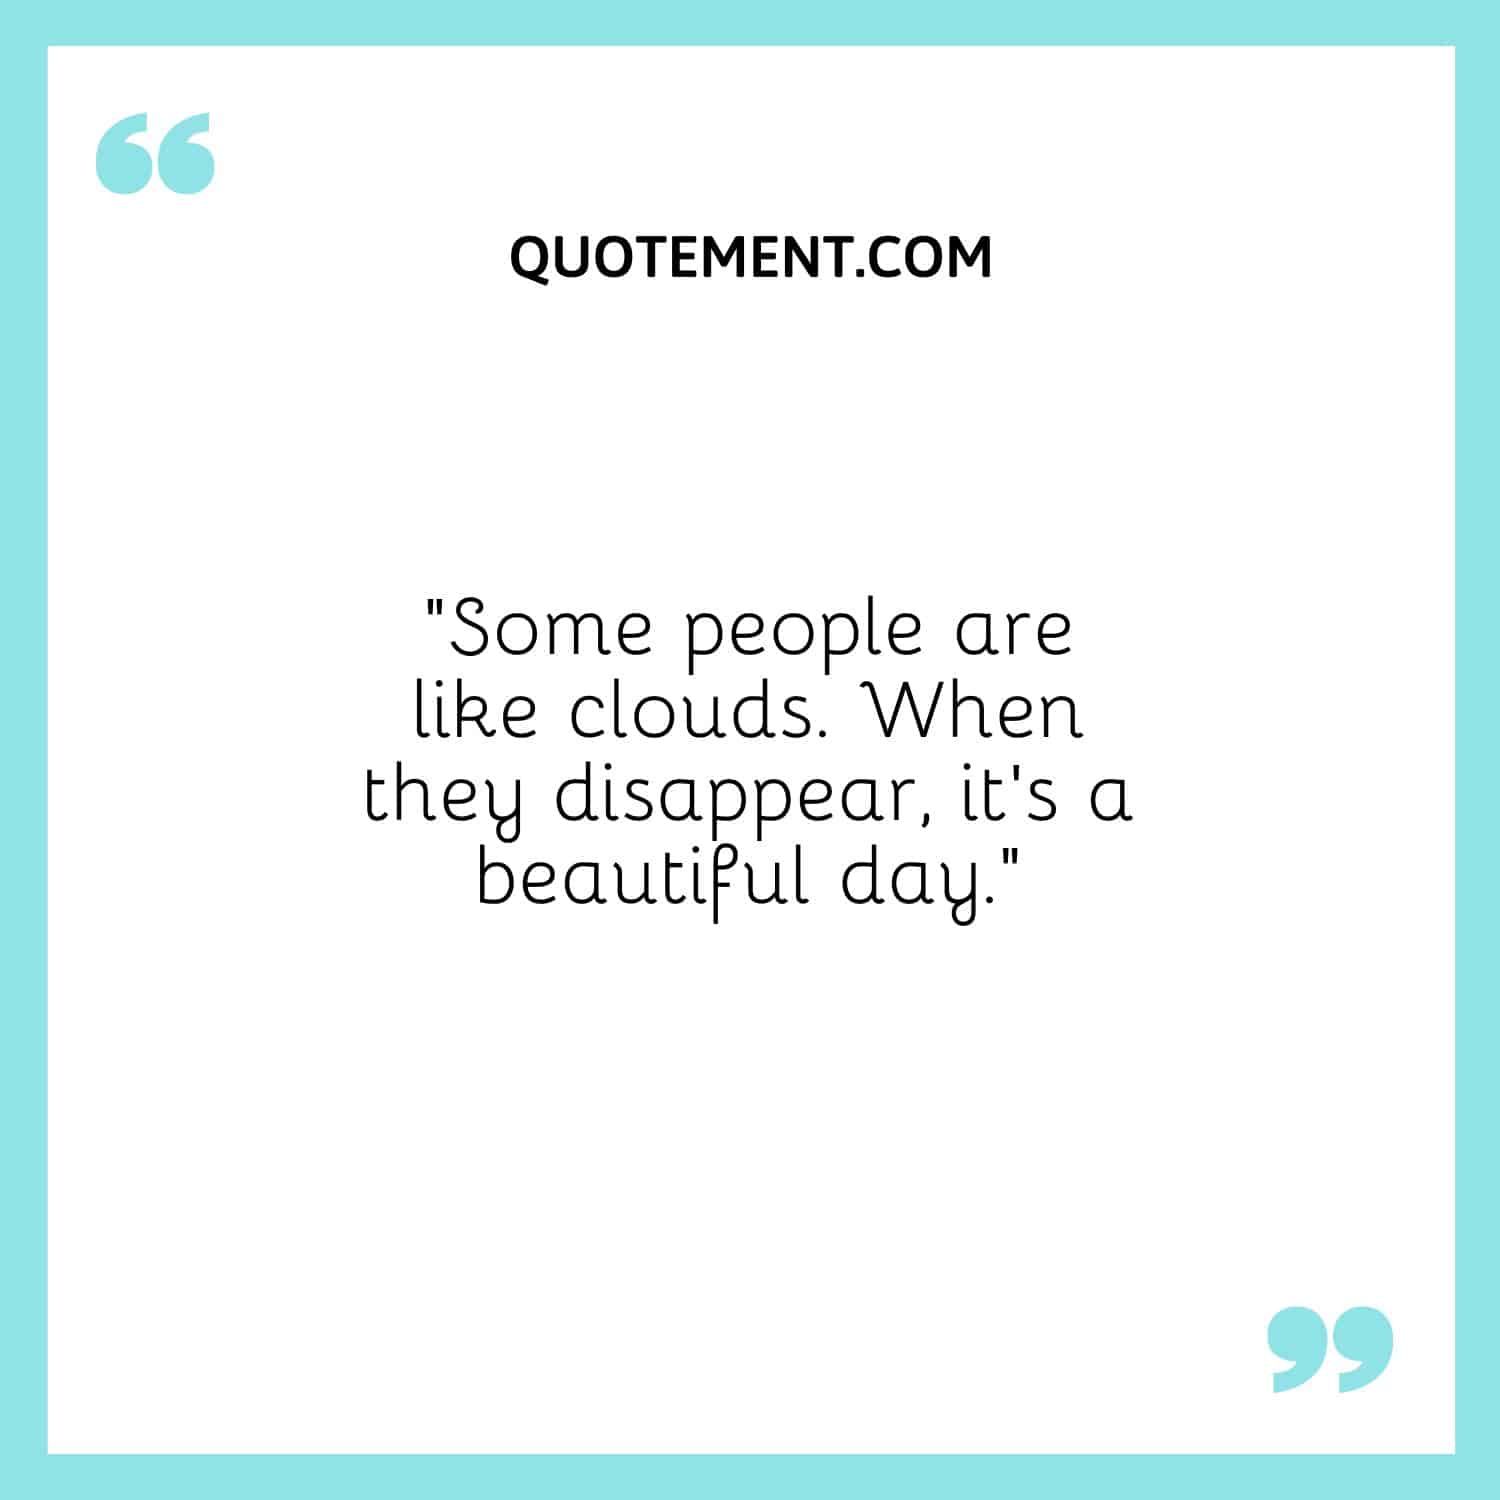 “Some people are like clouds. When they disappear, it’s a beautiful day.”